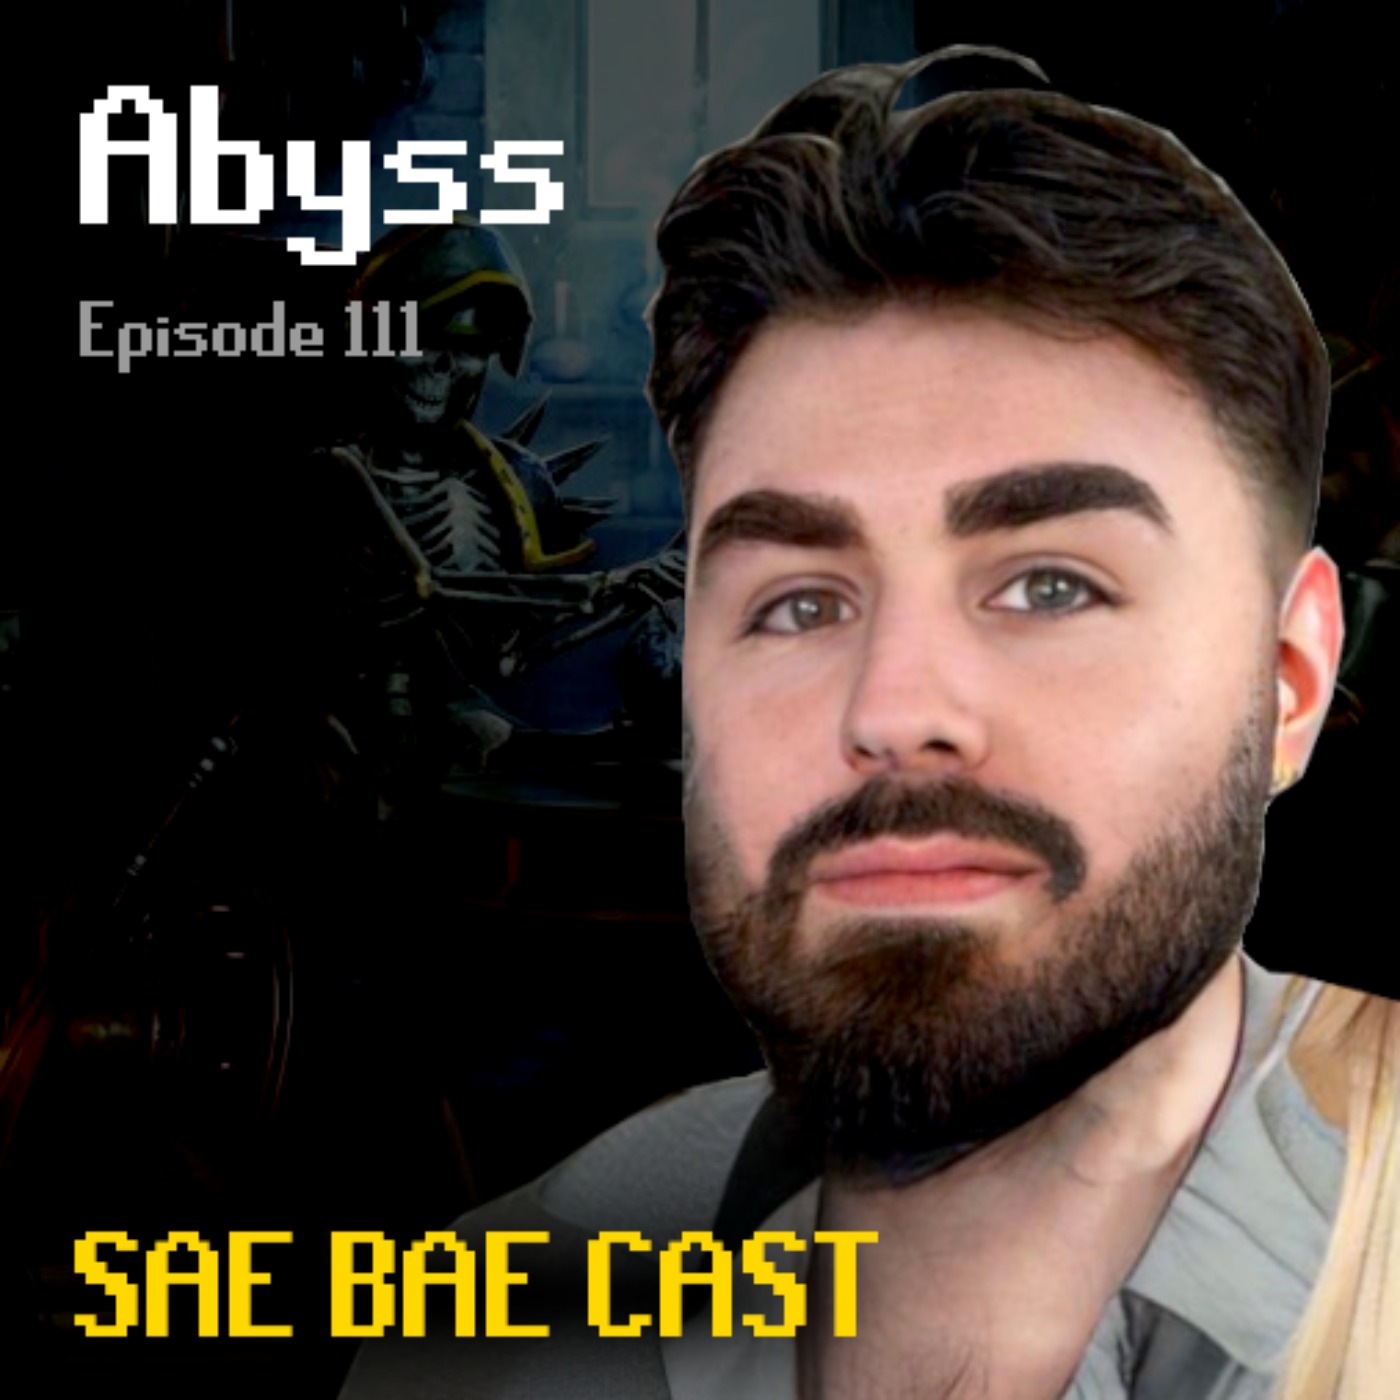 Abyss - State of PvP, Greatest RS Eras, Kick vs Twitch, Achieving Goals | Sae Bae Cast 111